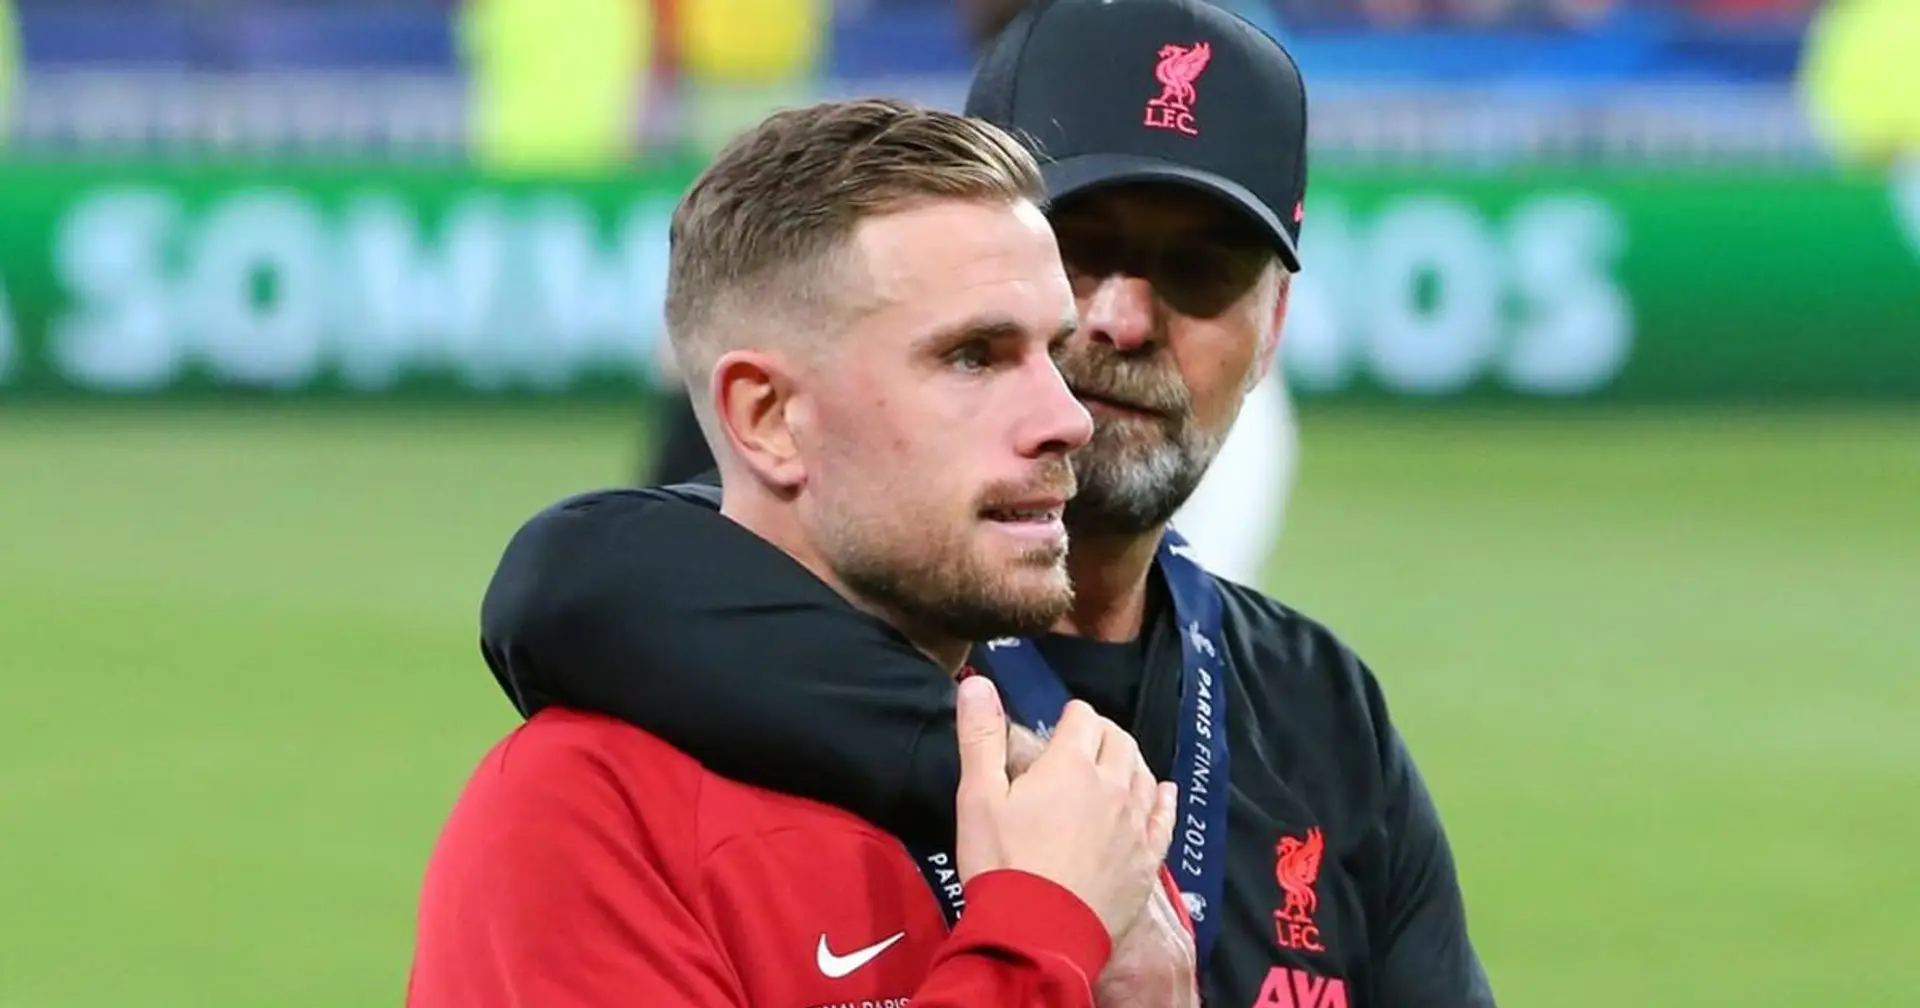 Henderson leaning towards Saudi Arabia move & 2 more big stories at Liverpool you might've missed